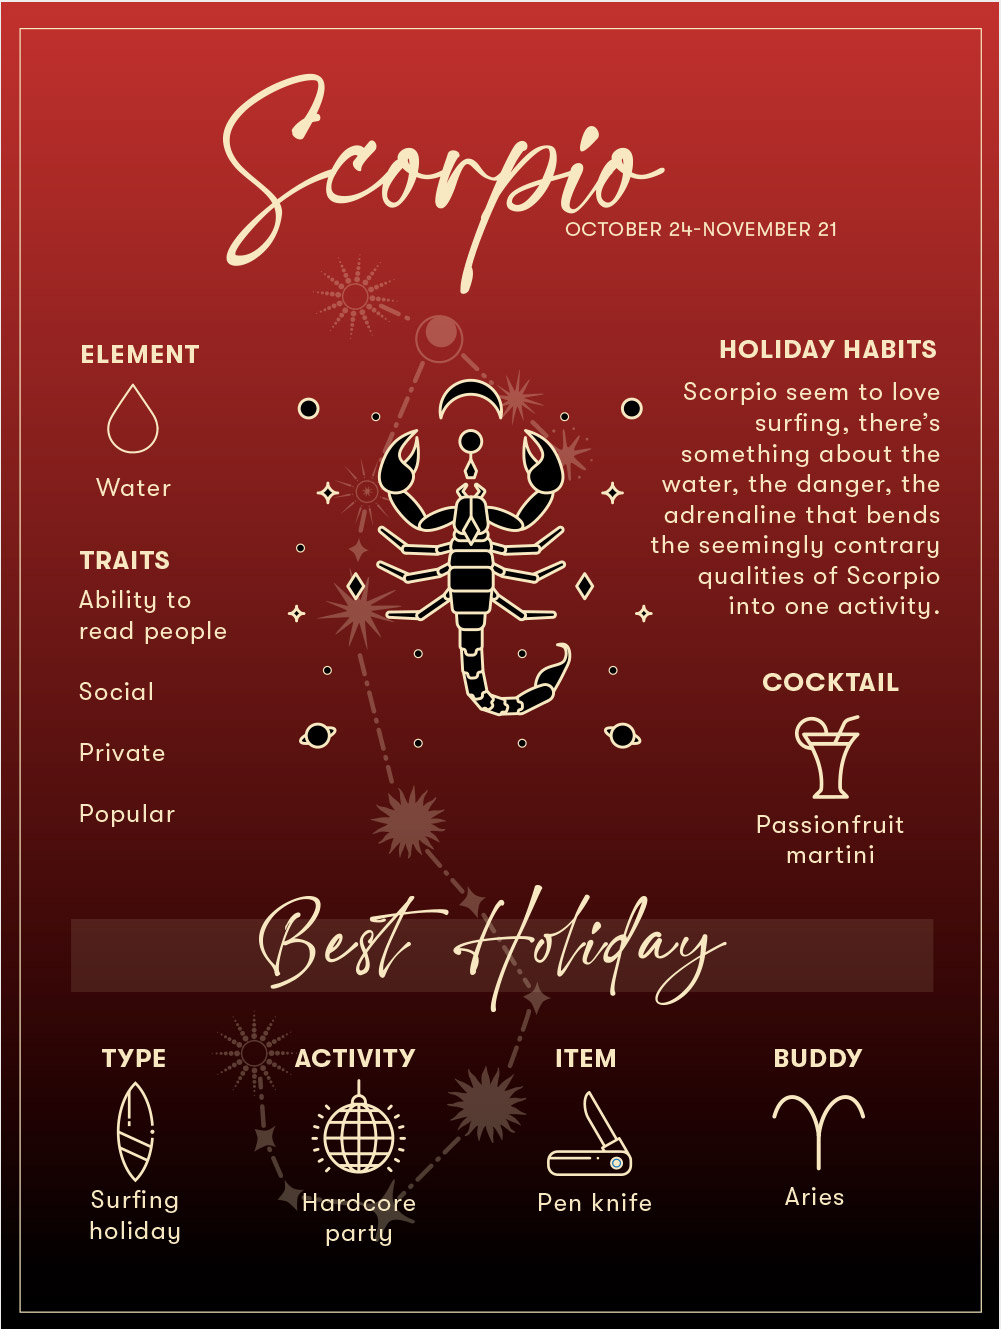 The Best Holiday By Zodiac Sign Which Is Right For You?